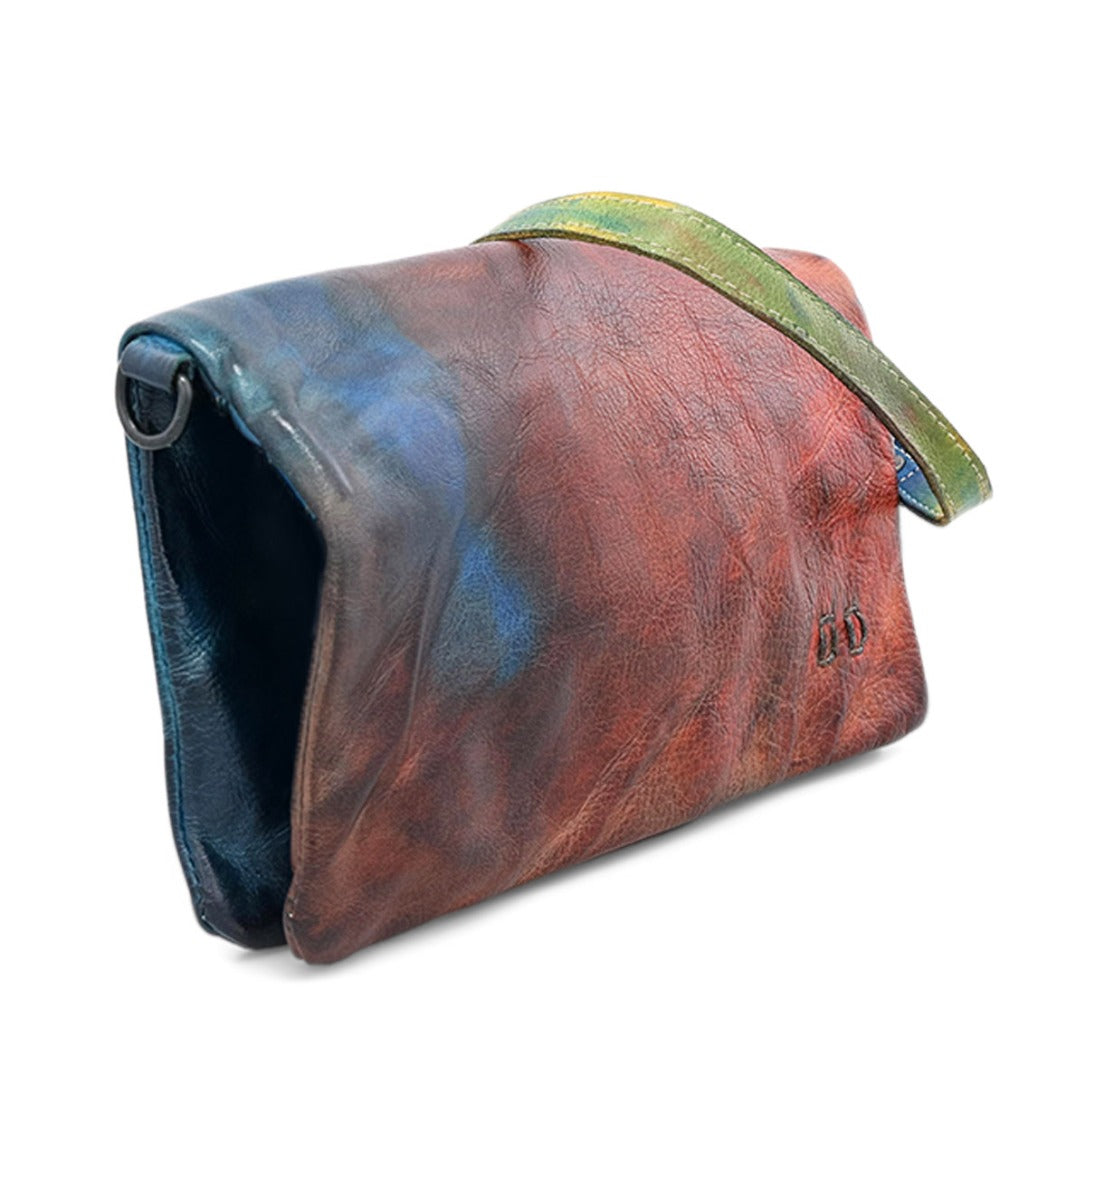 Cadence colorful leather bag with a strap, made by Bed Stu.